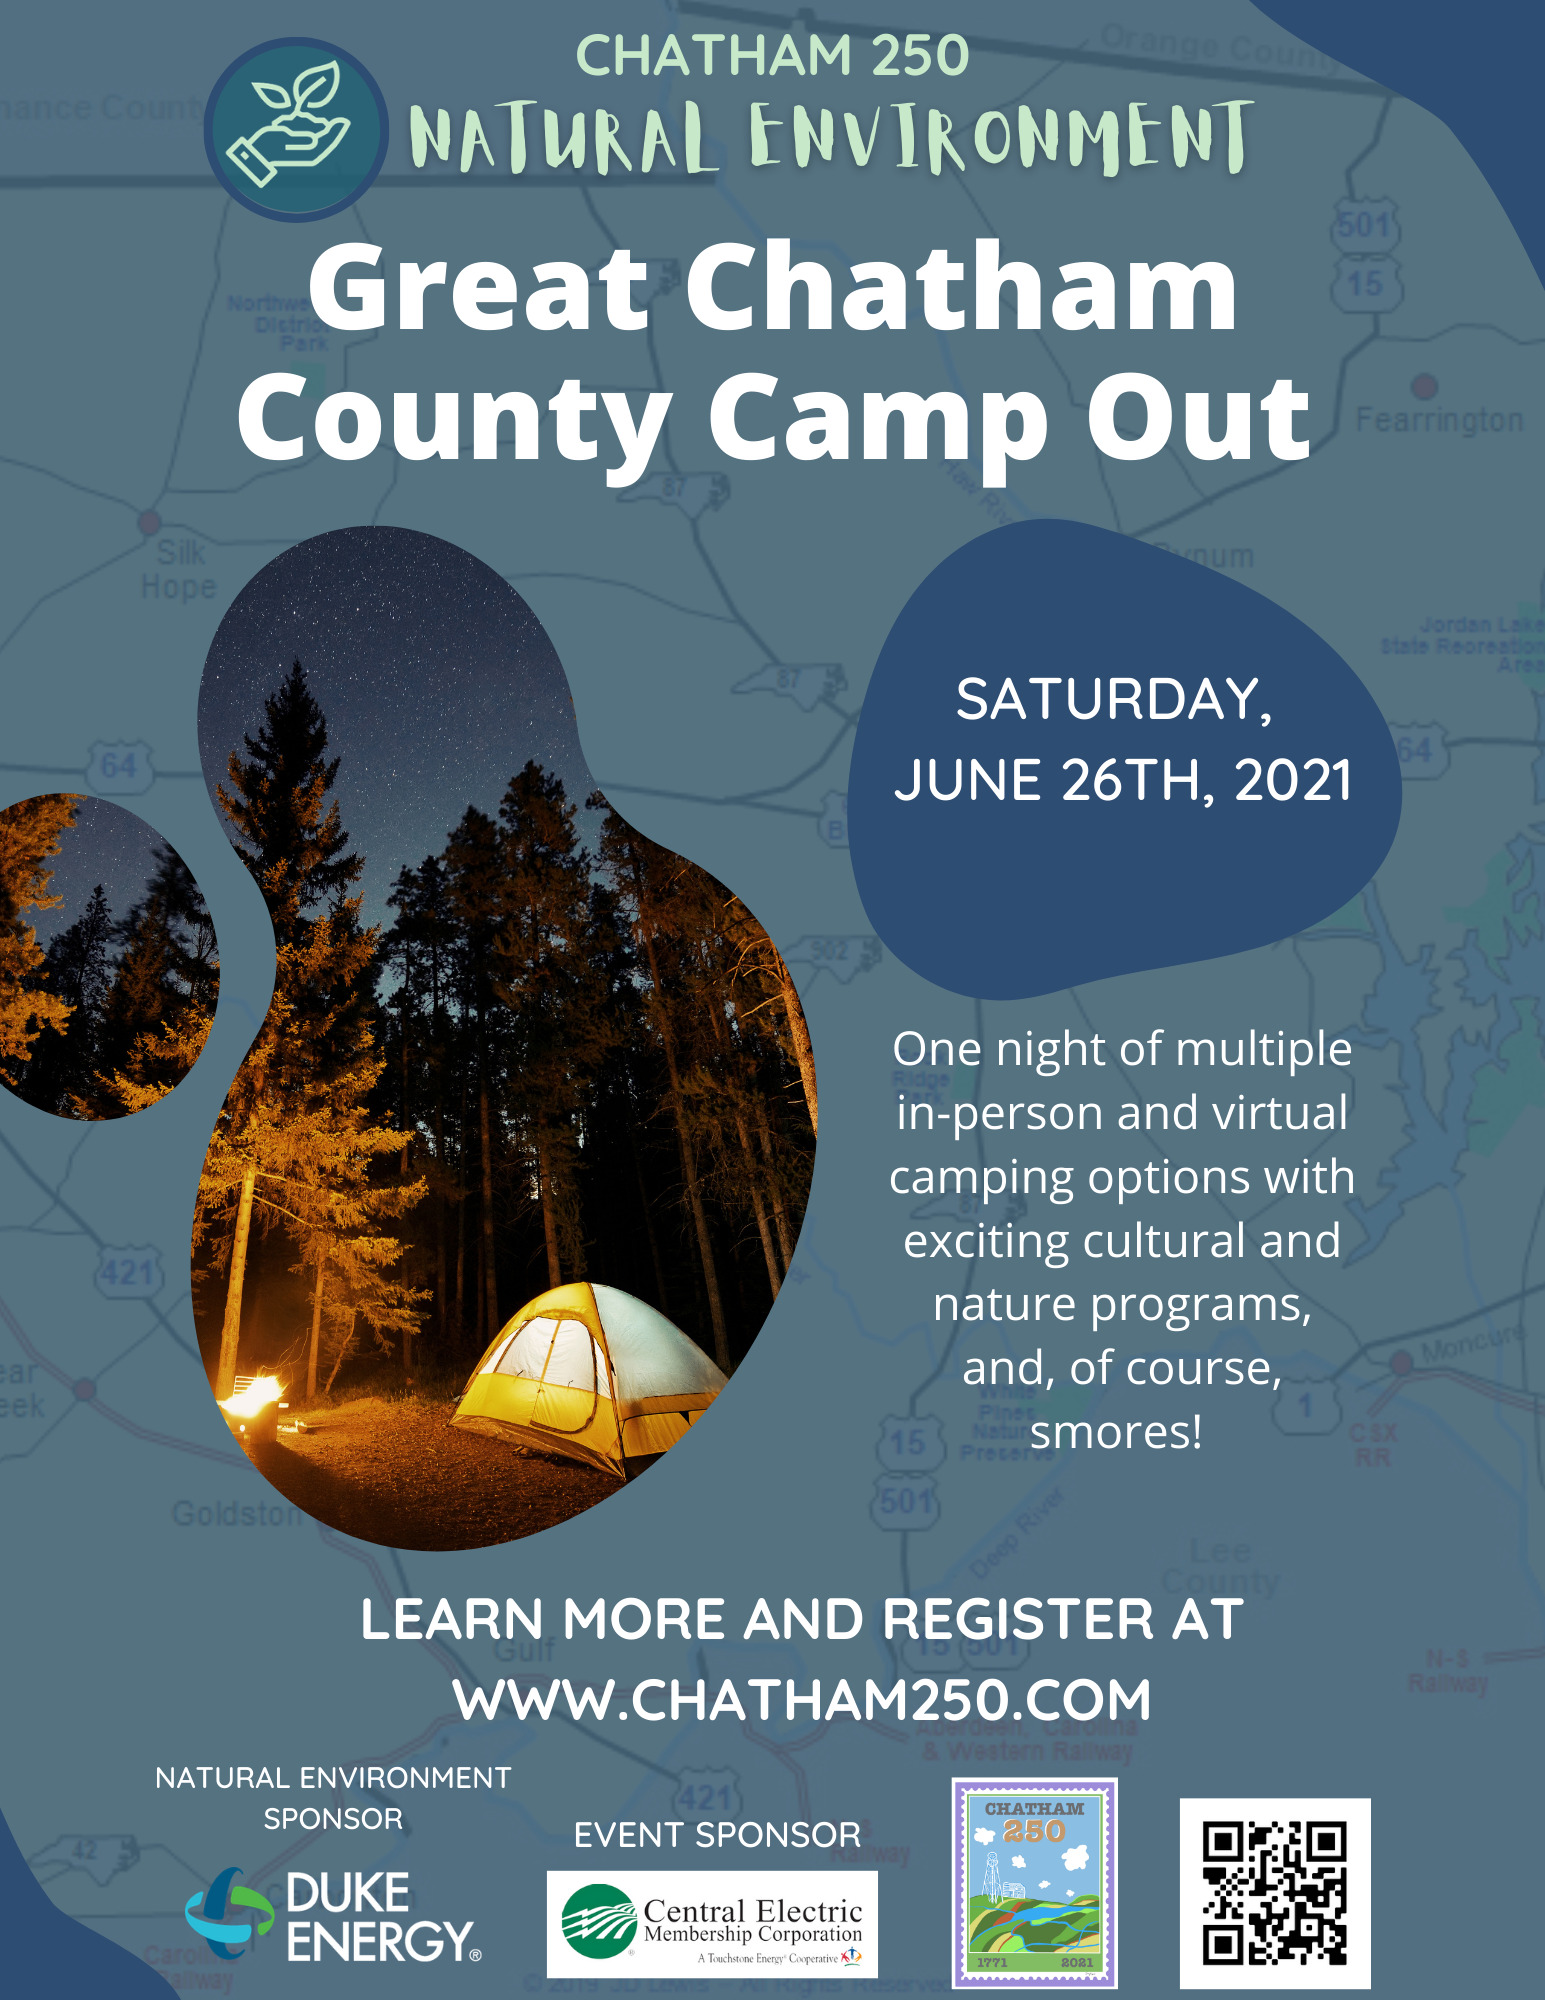 Chatham 250 Camping event